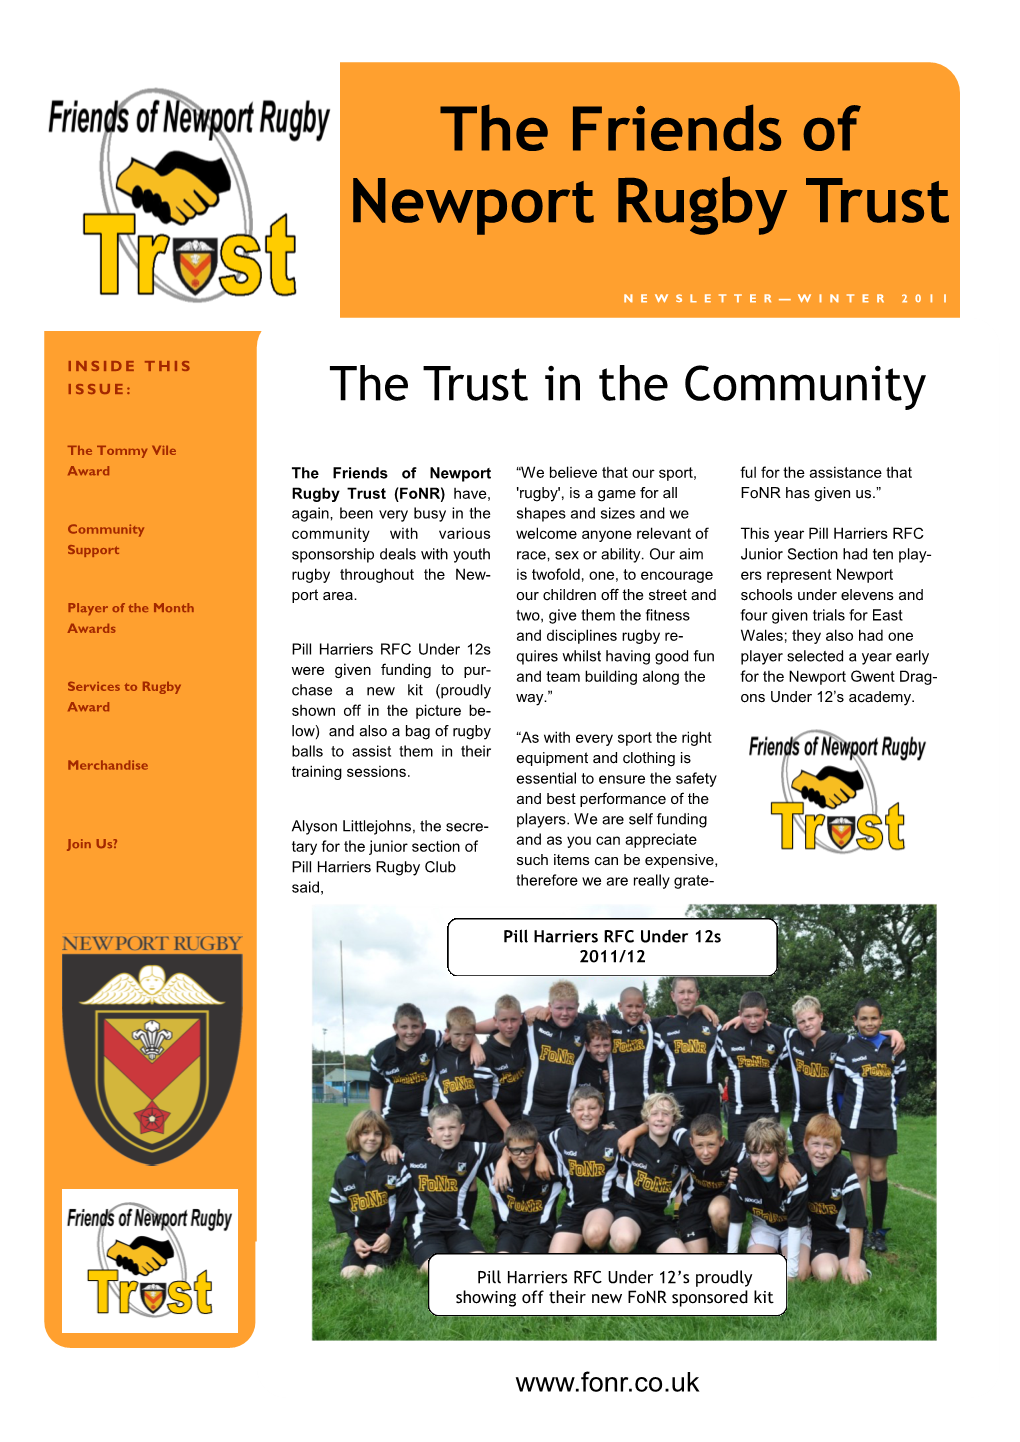 The Friends of Newport Rugby Trust